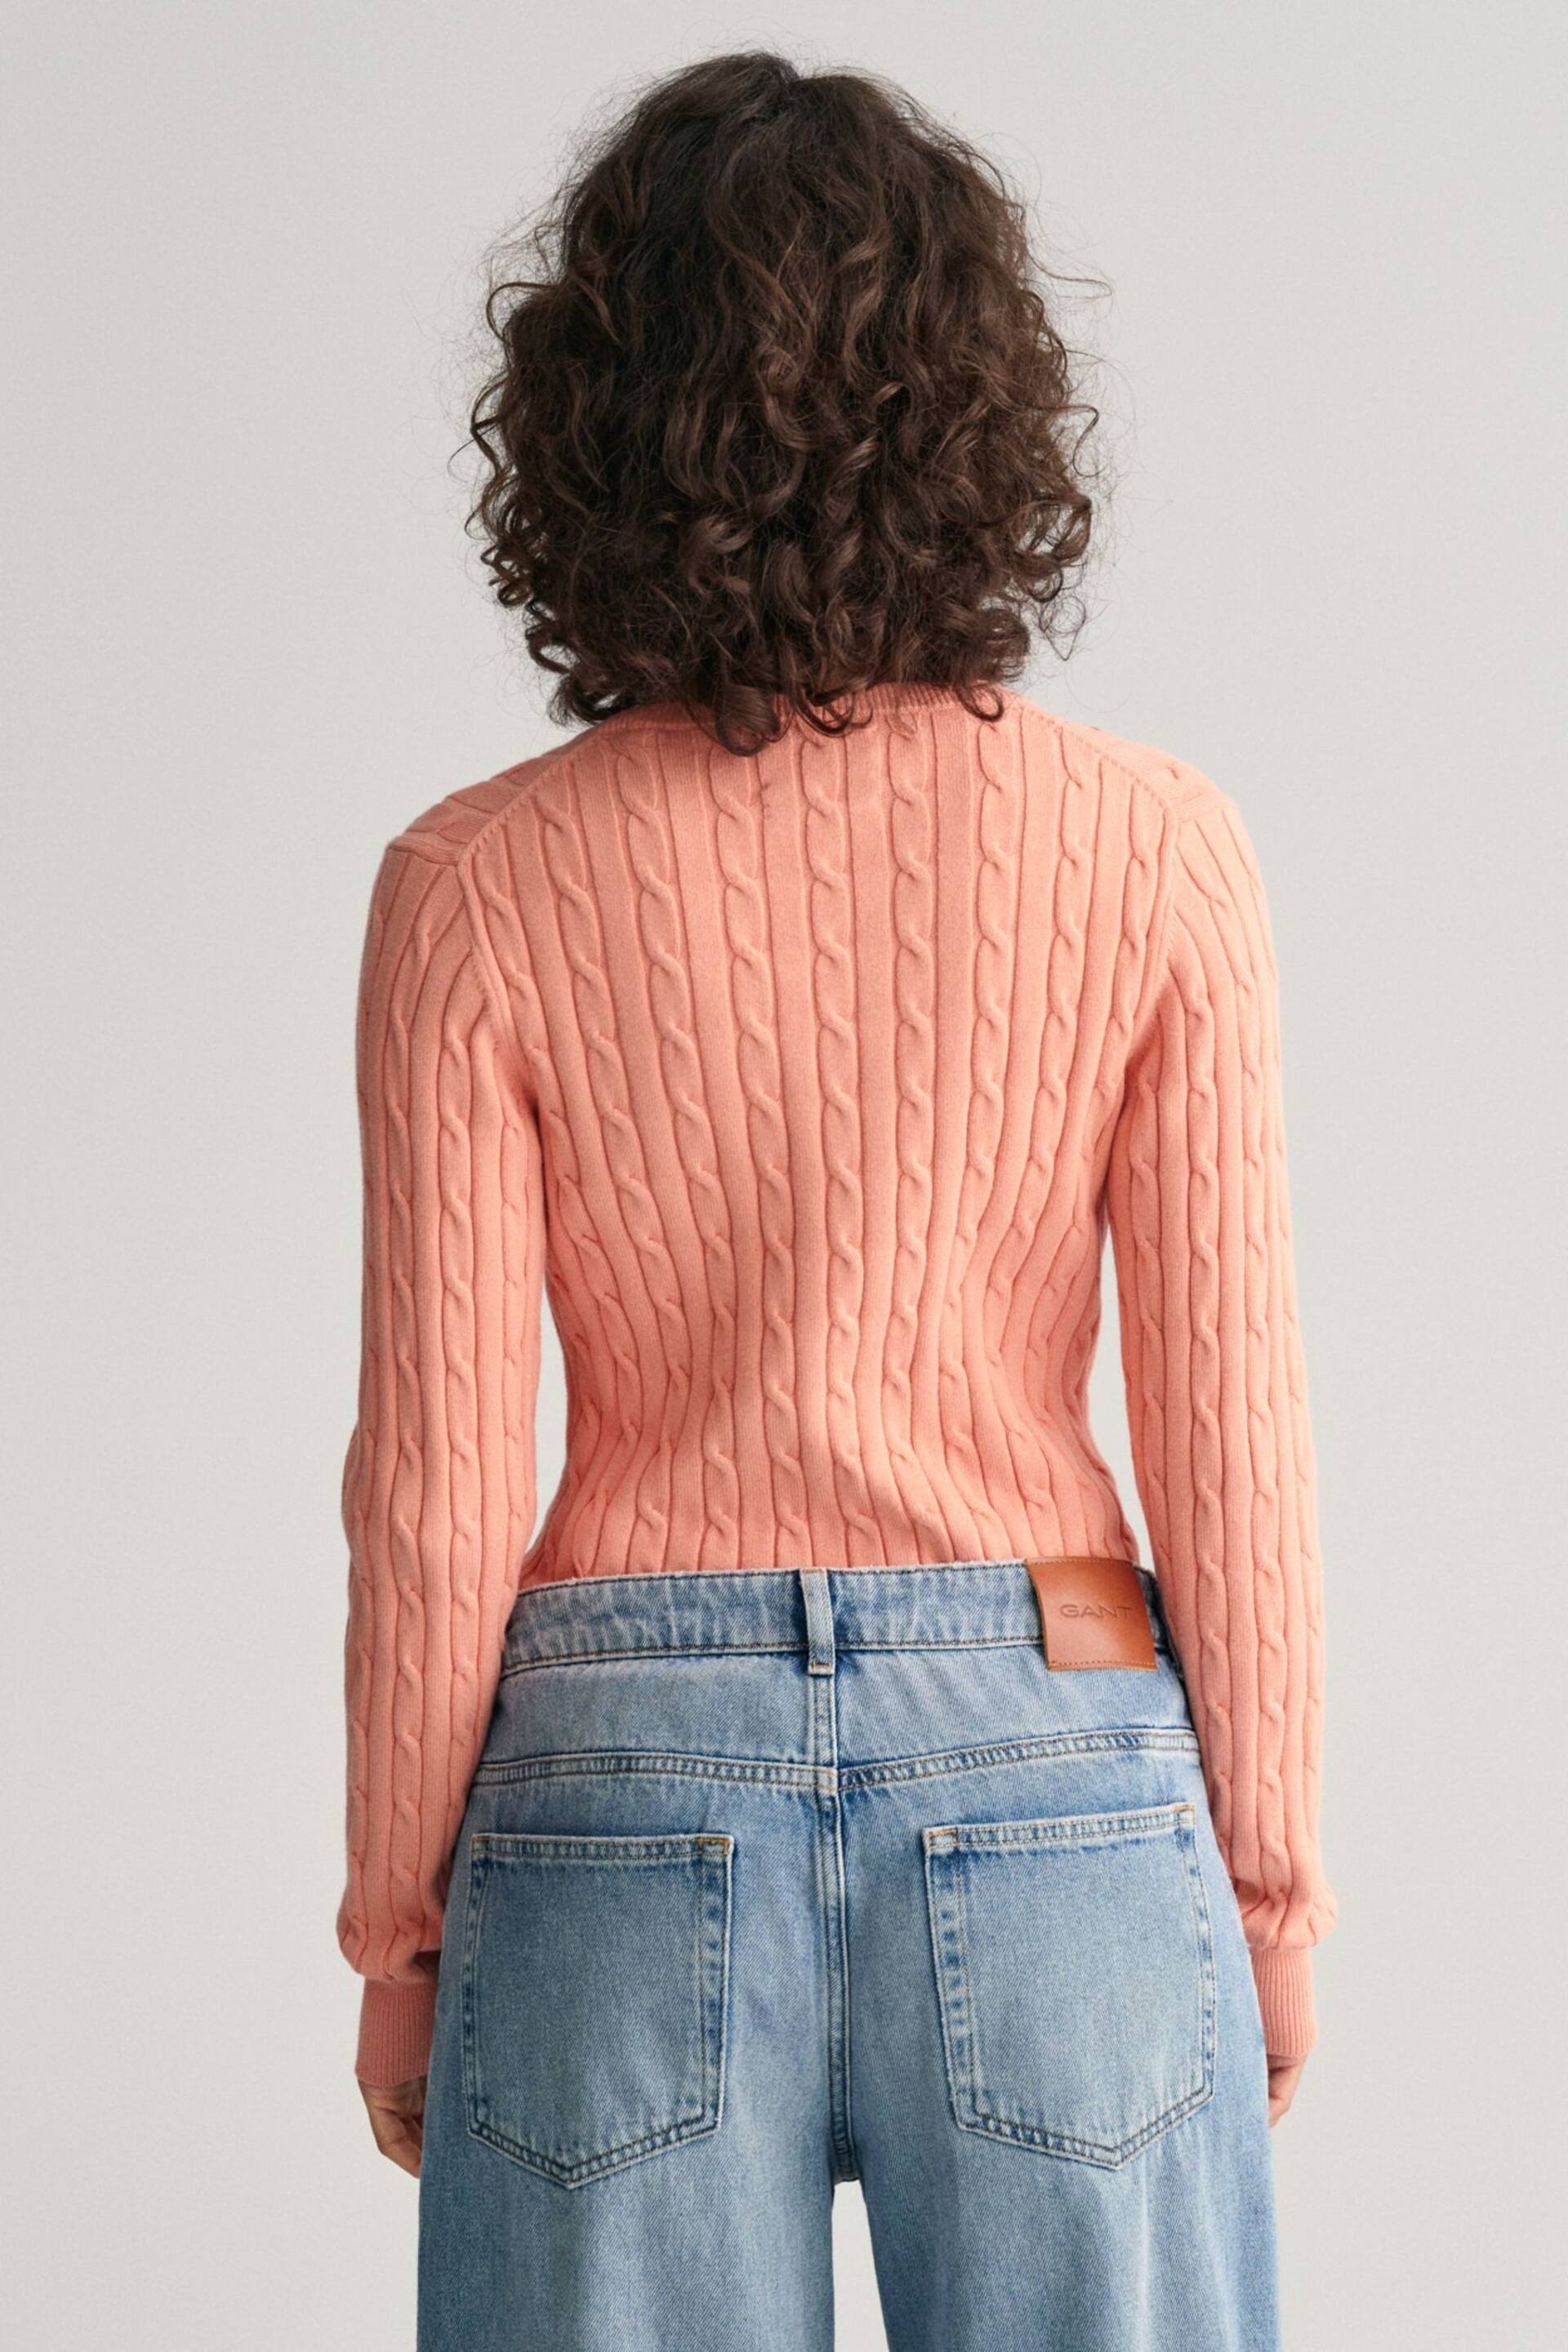 GANT Stretch Cotton Cable Knit Jumper - Image 2 of 4